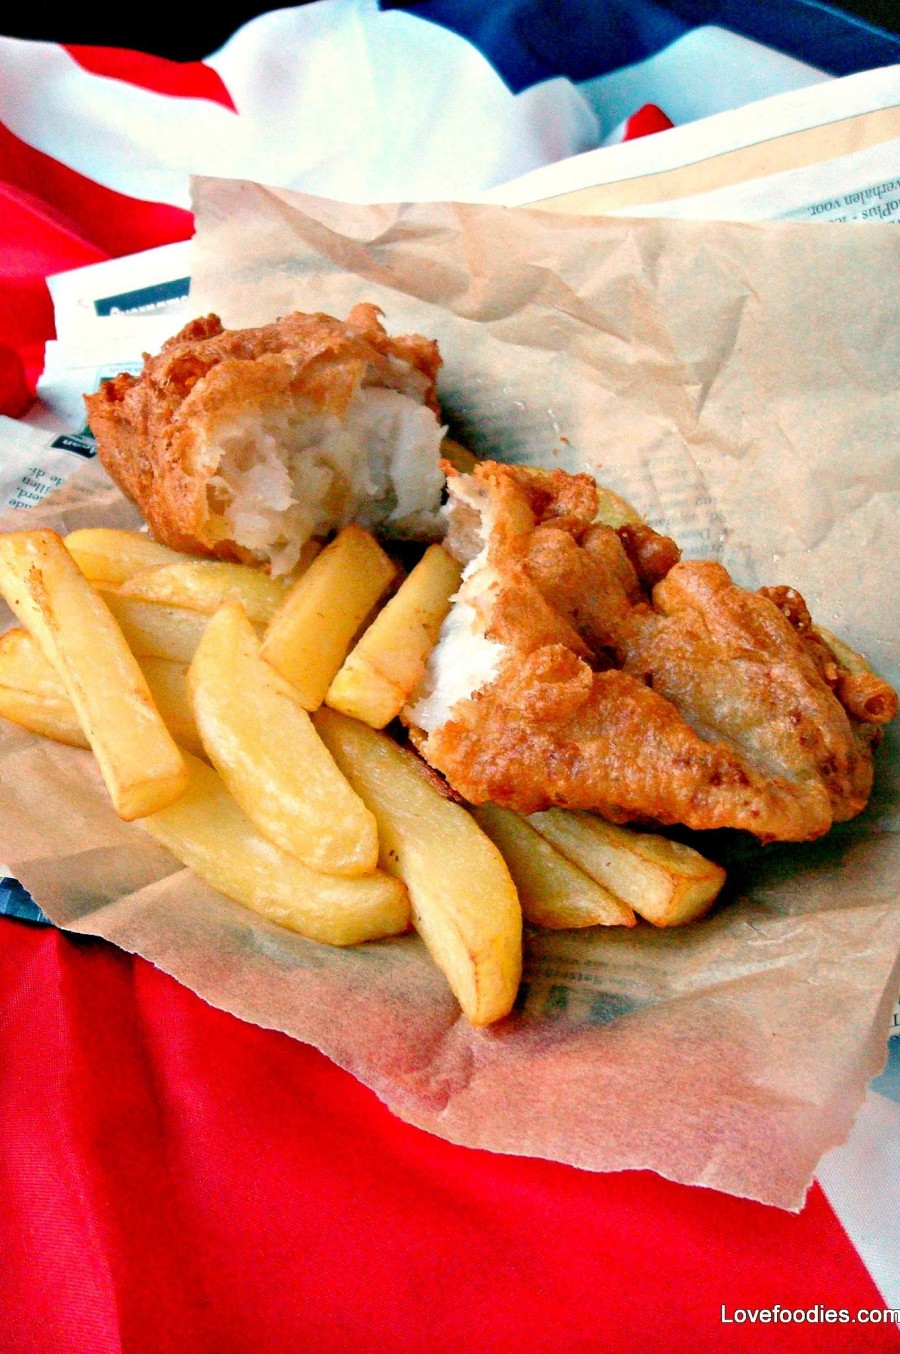 FISH AND CHIPS ON THE MENU PLAN